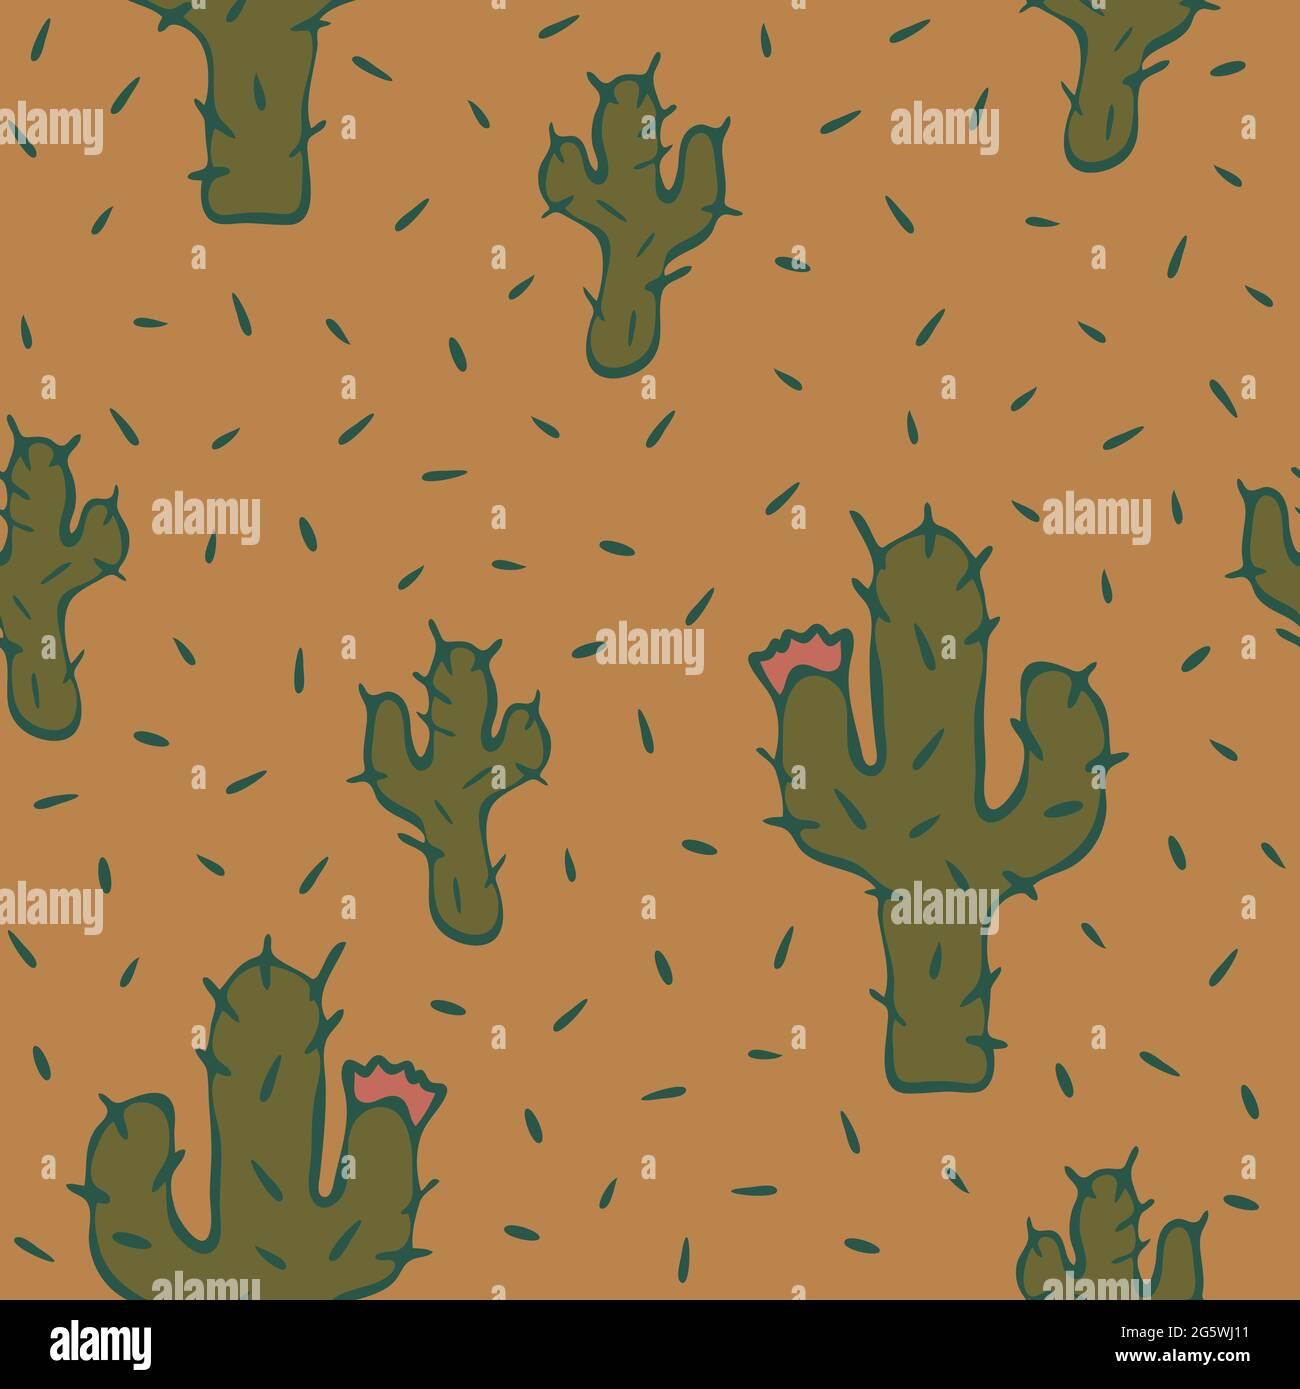 Seamless Vector Pattern With Cactus On Light Brown Background